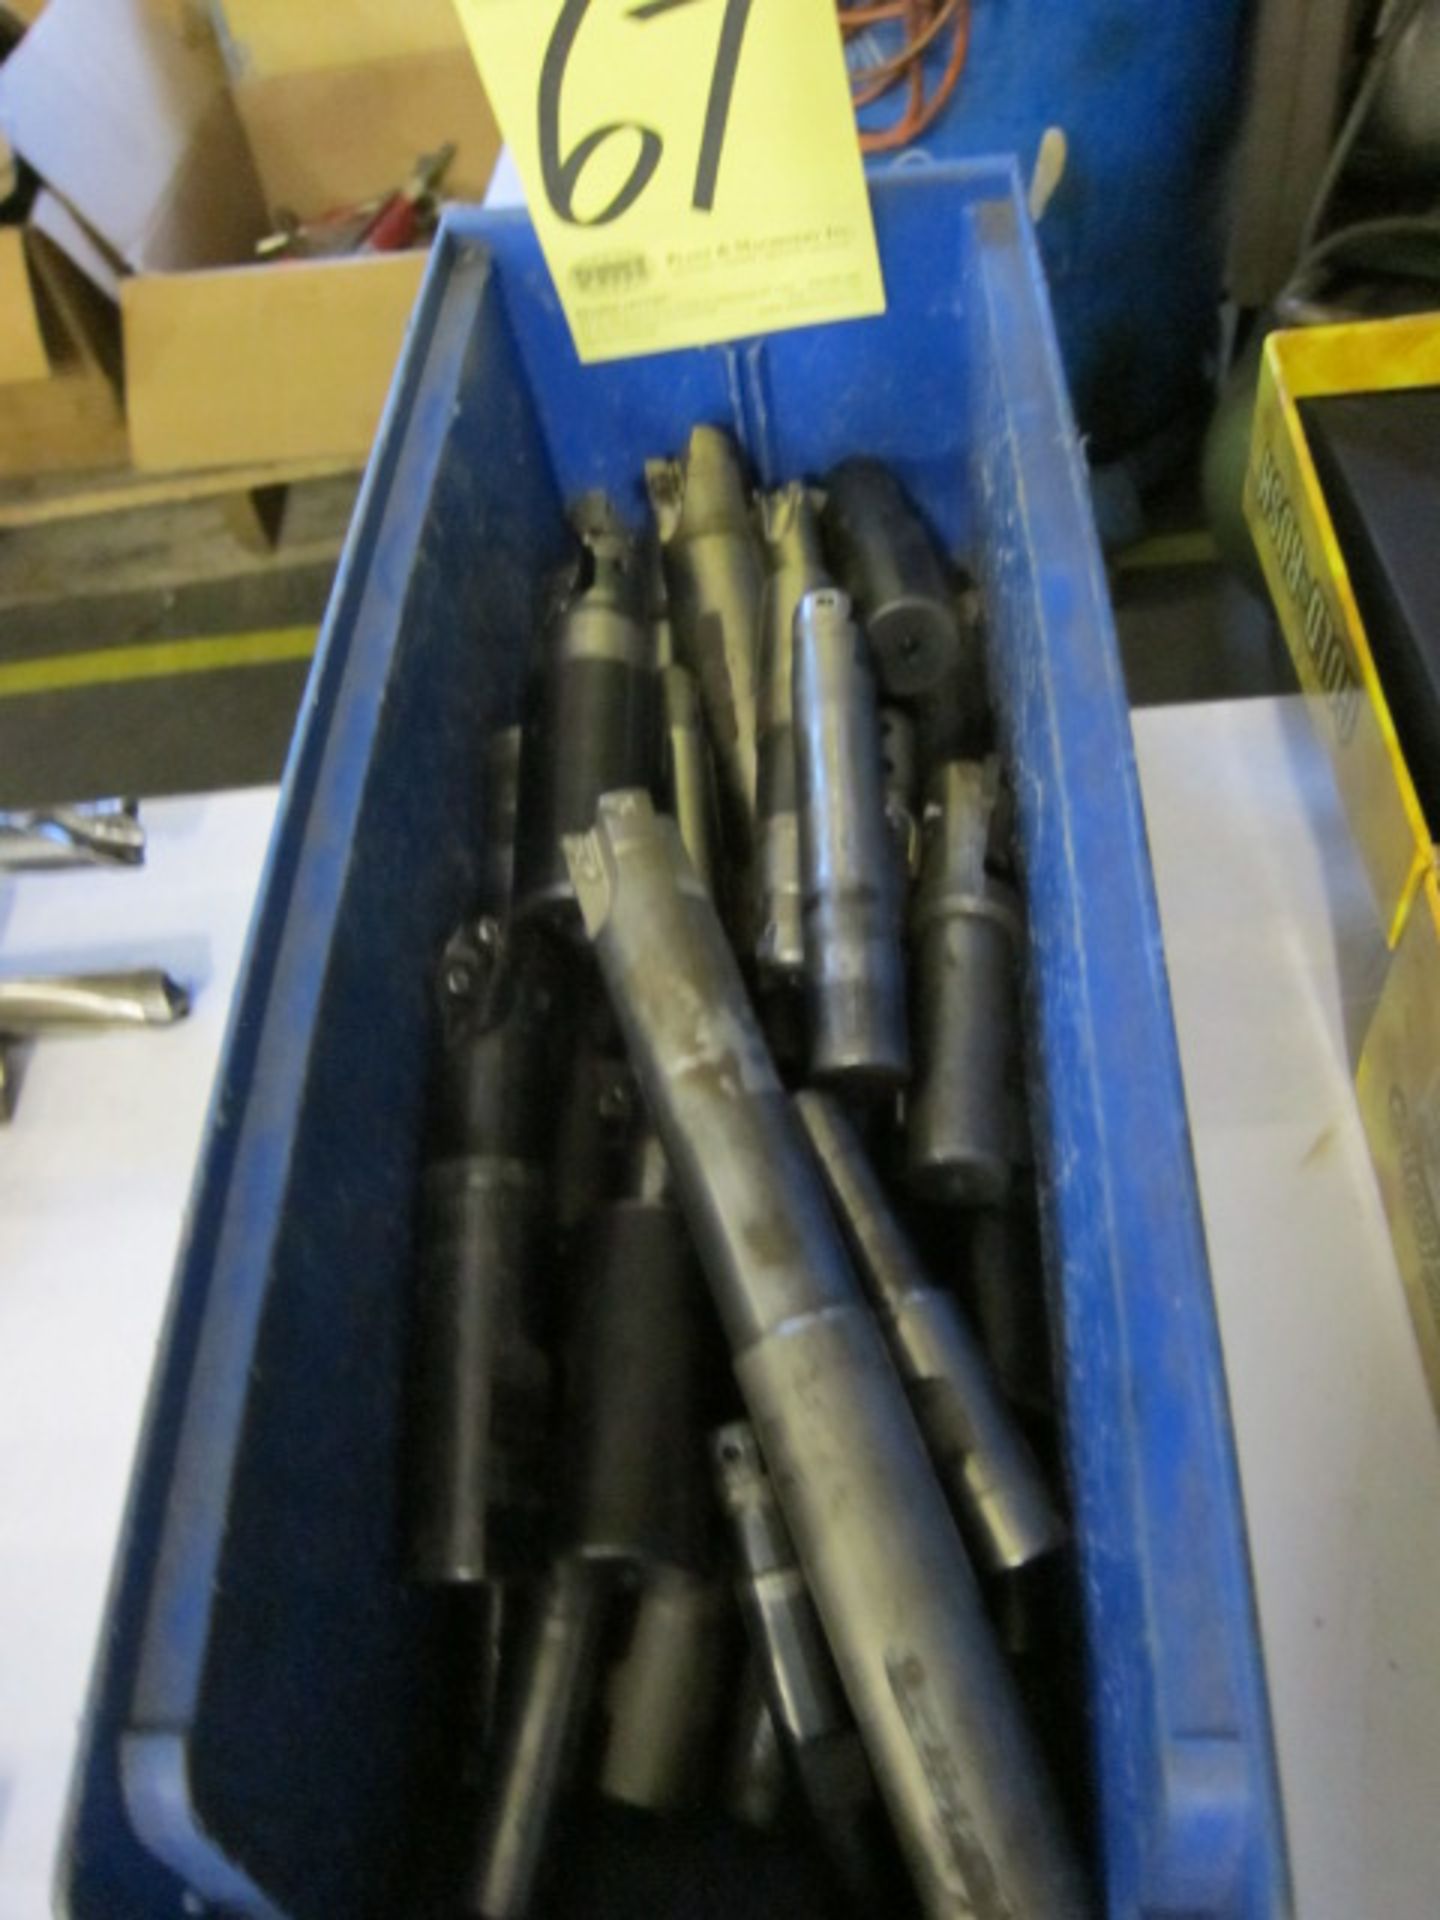 LOT OF INSERT TOOLCUTTERS, assorted (in one box)